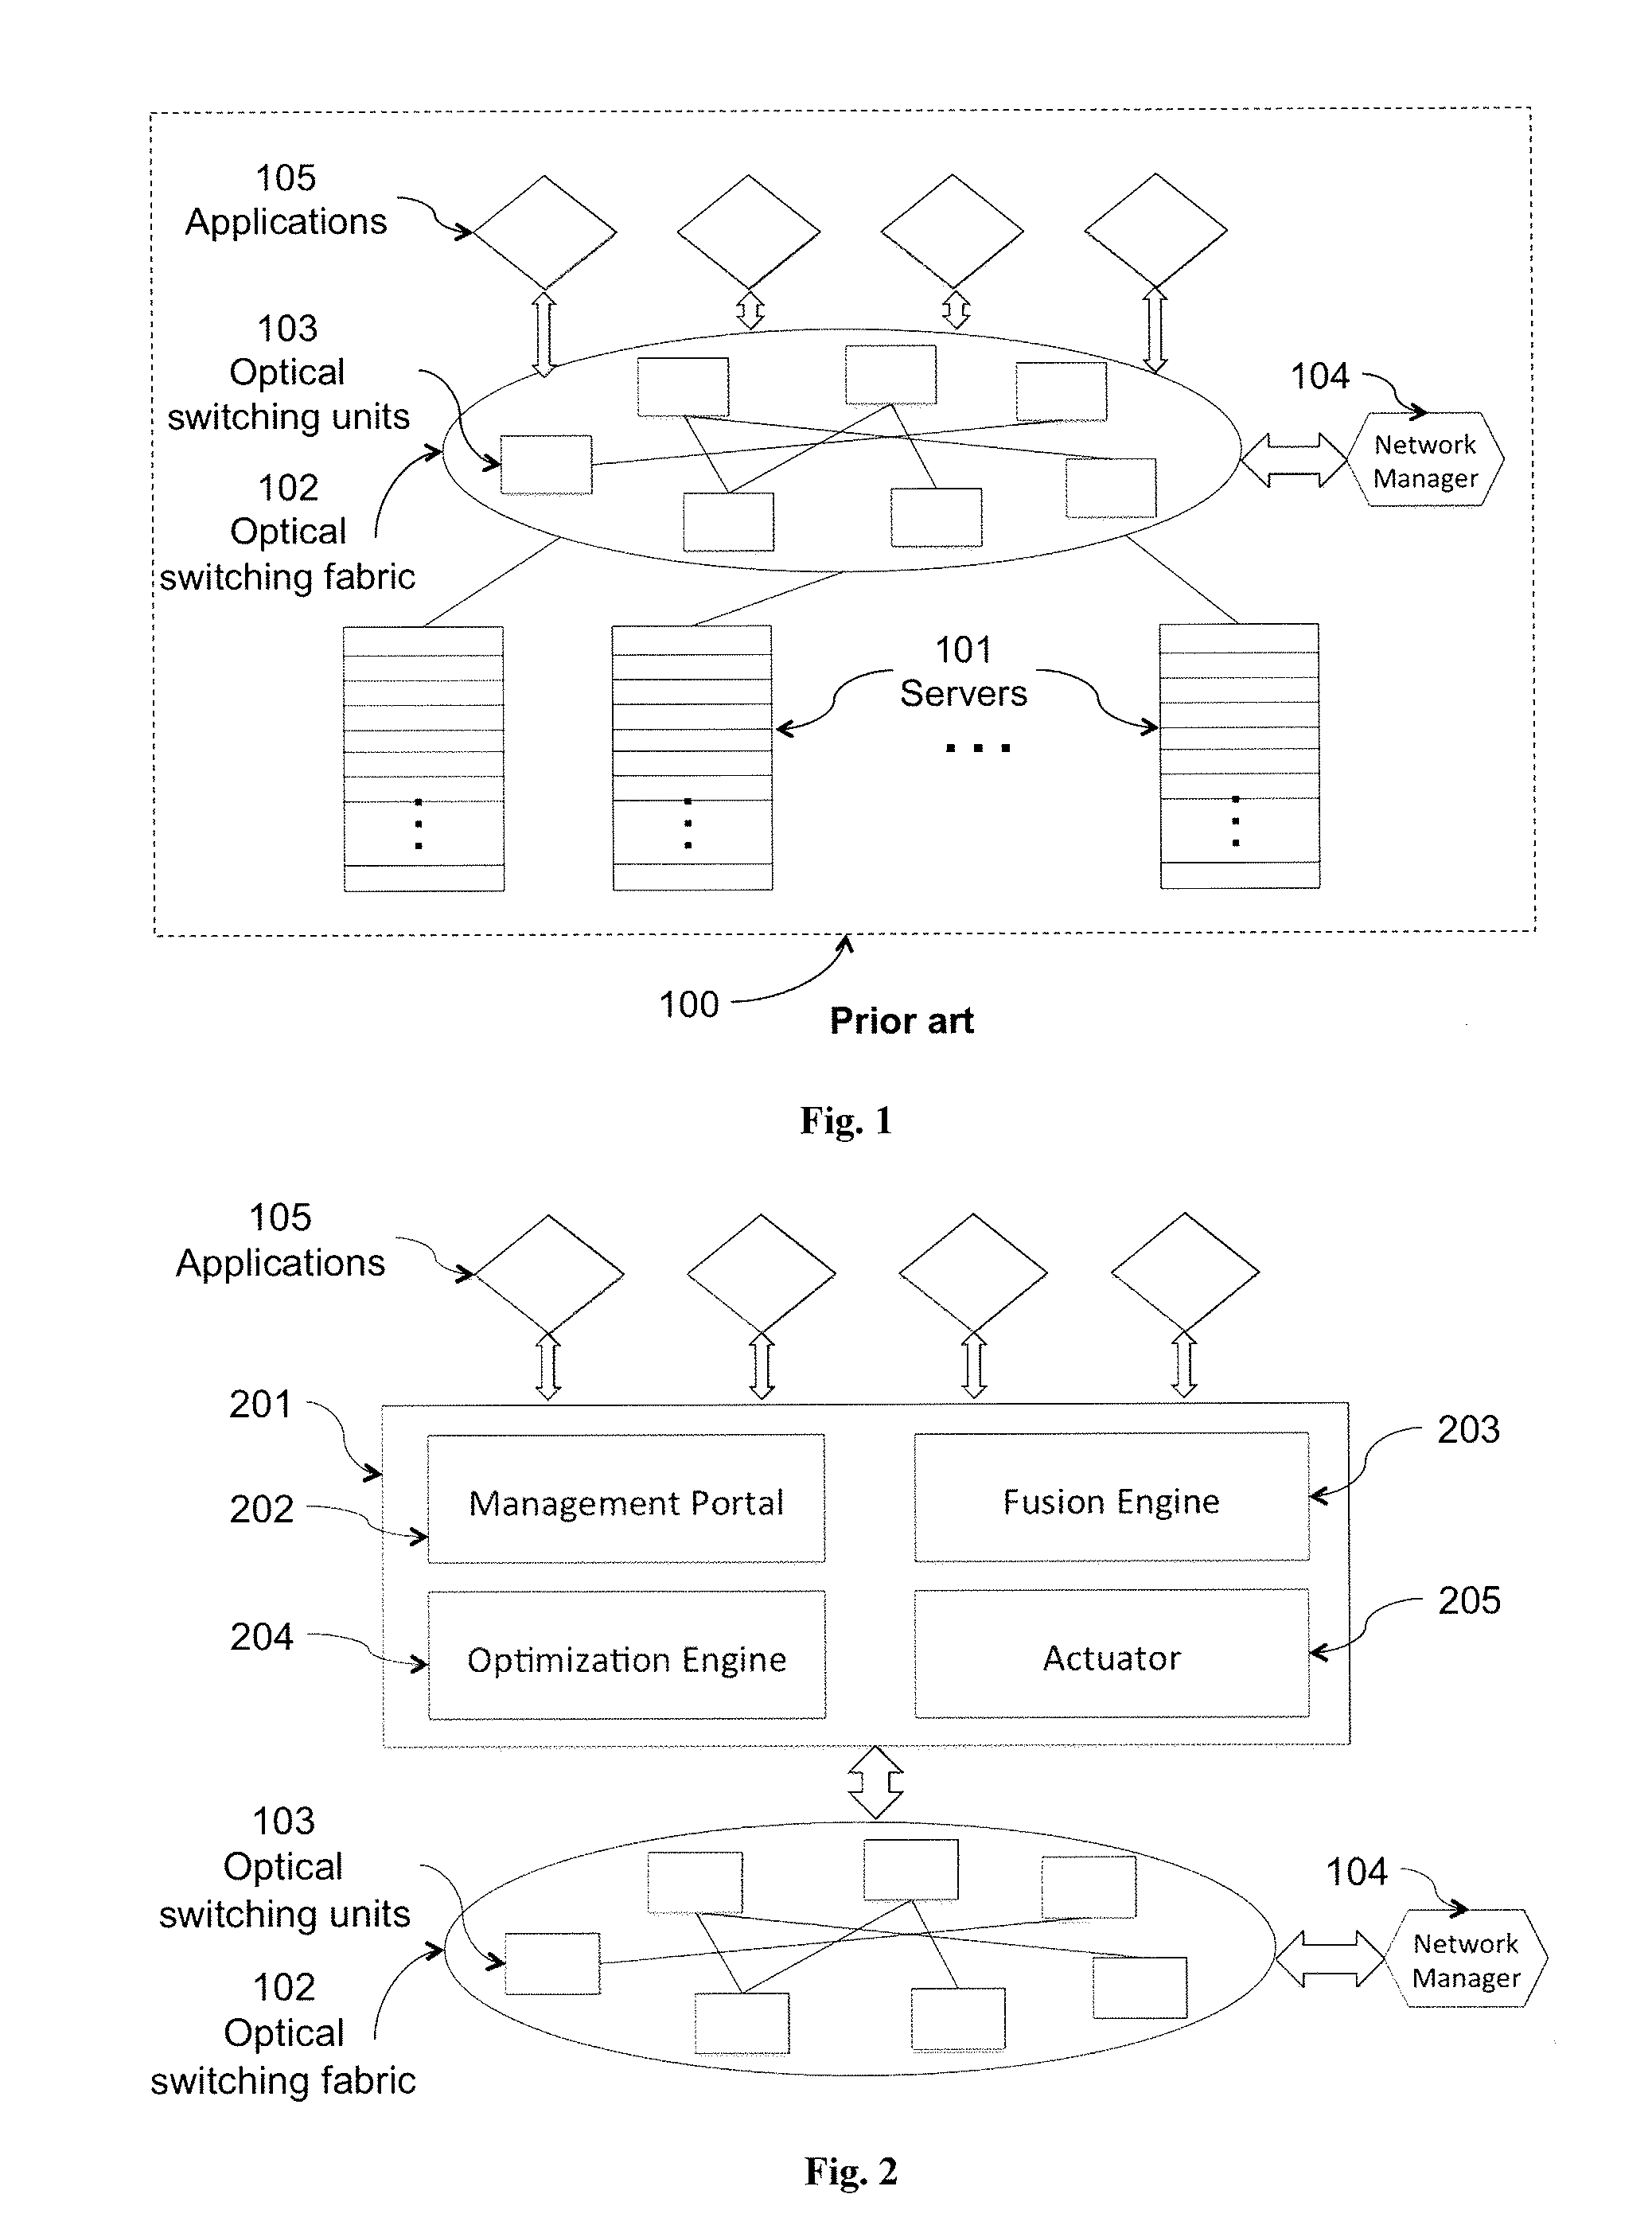 Method and Apparatus for Efficient and Transparent Network Management and Application Coordination for Software Defined Optical Switched Data Center Networks